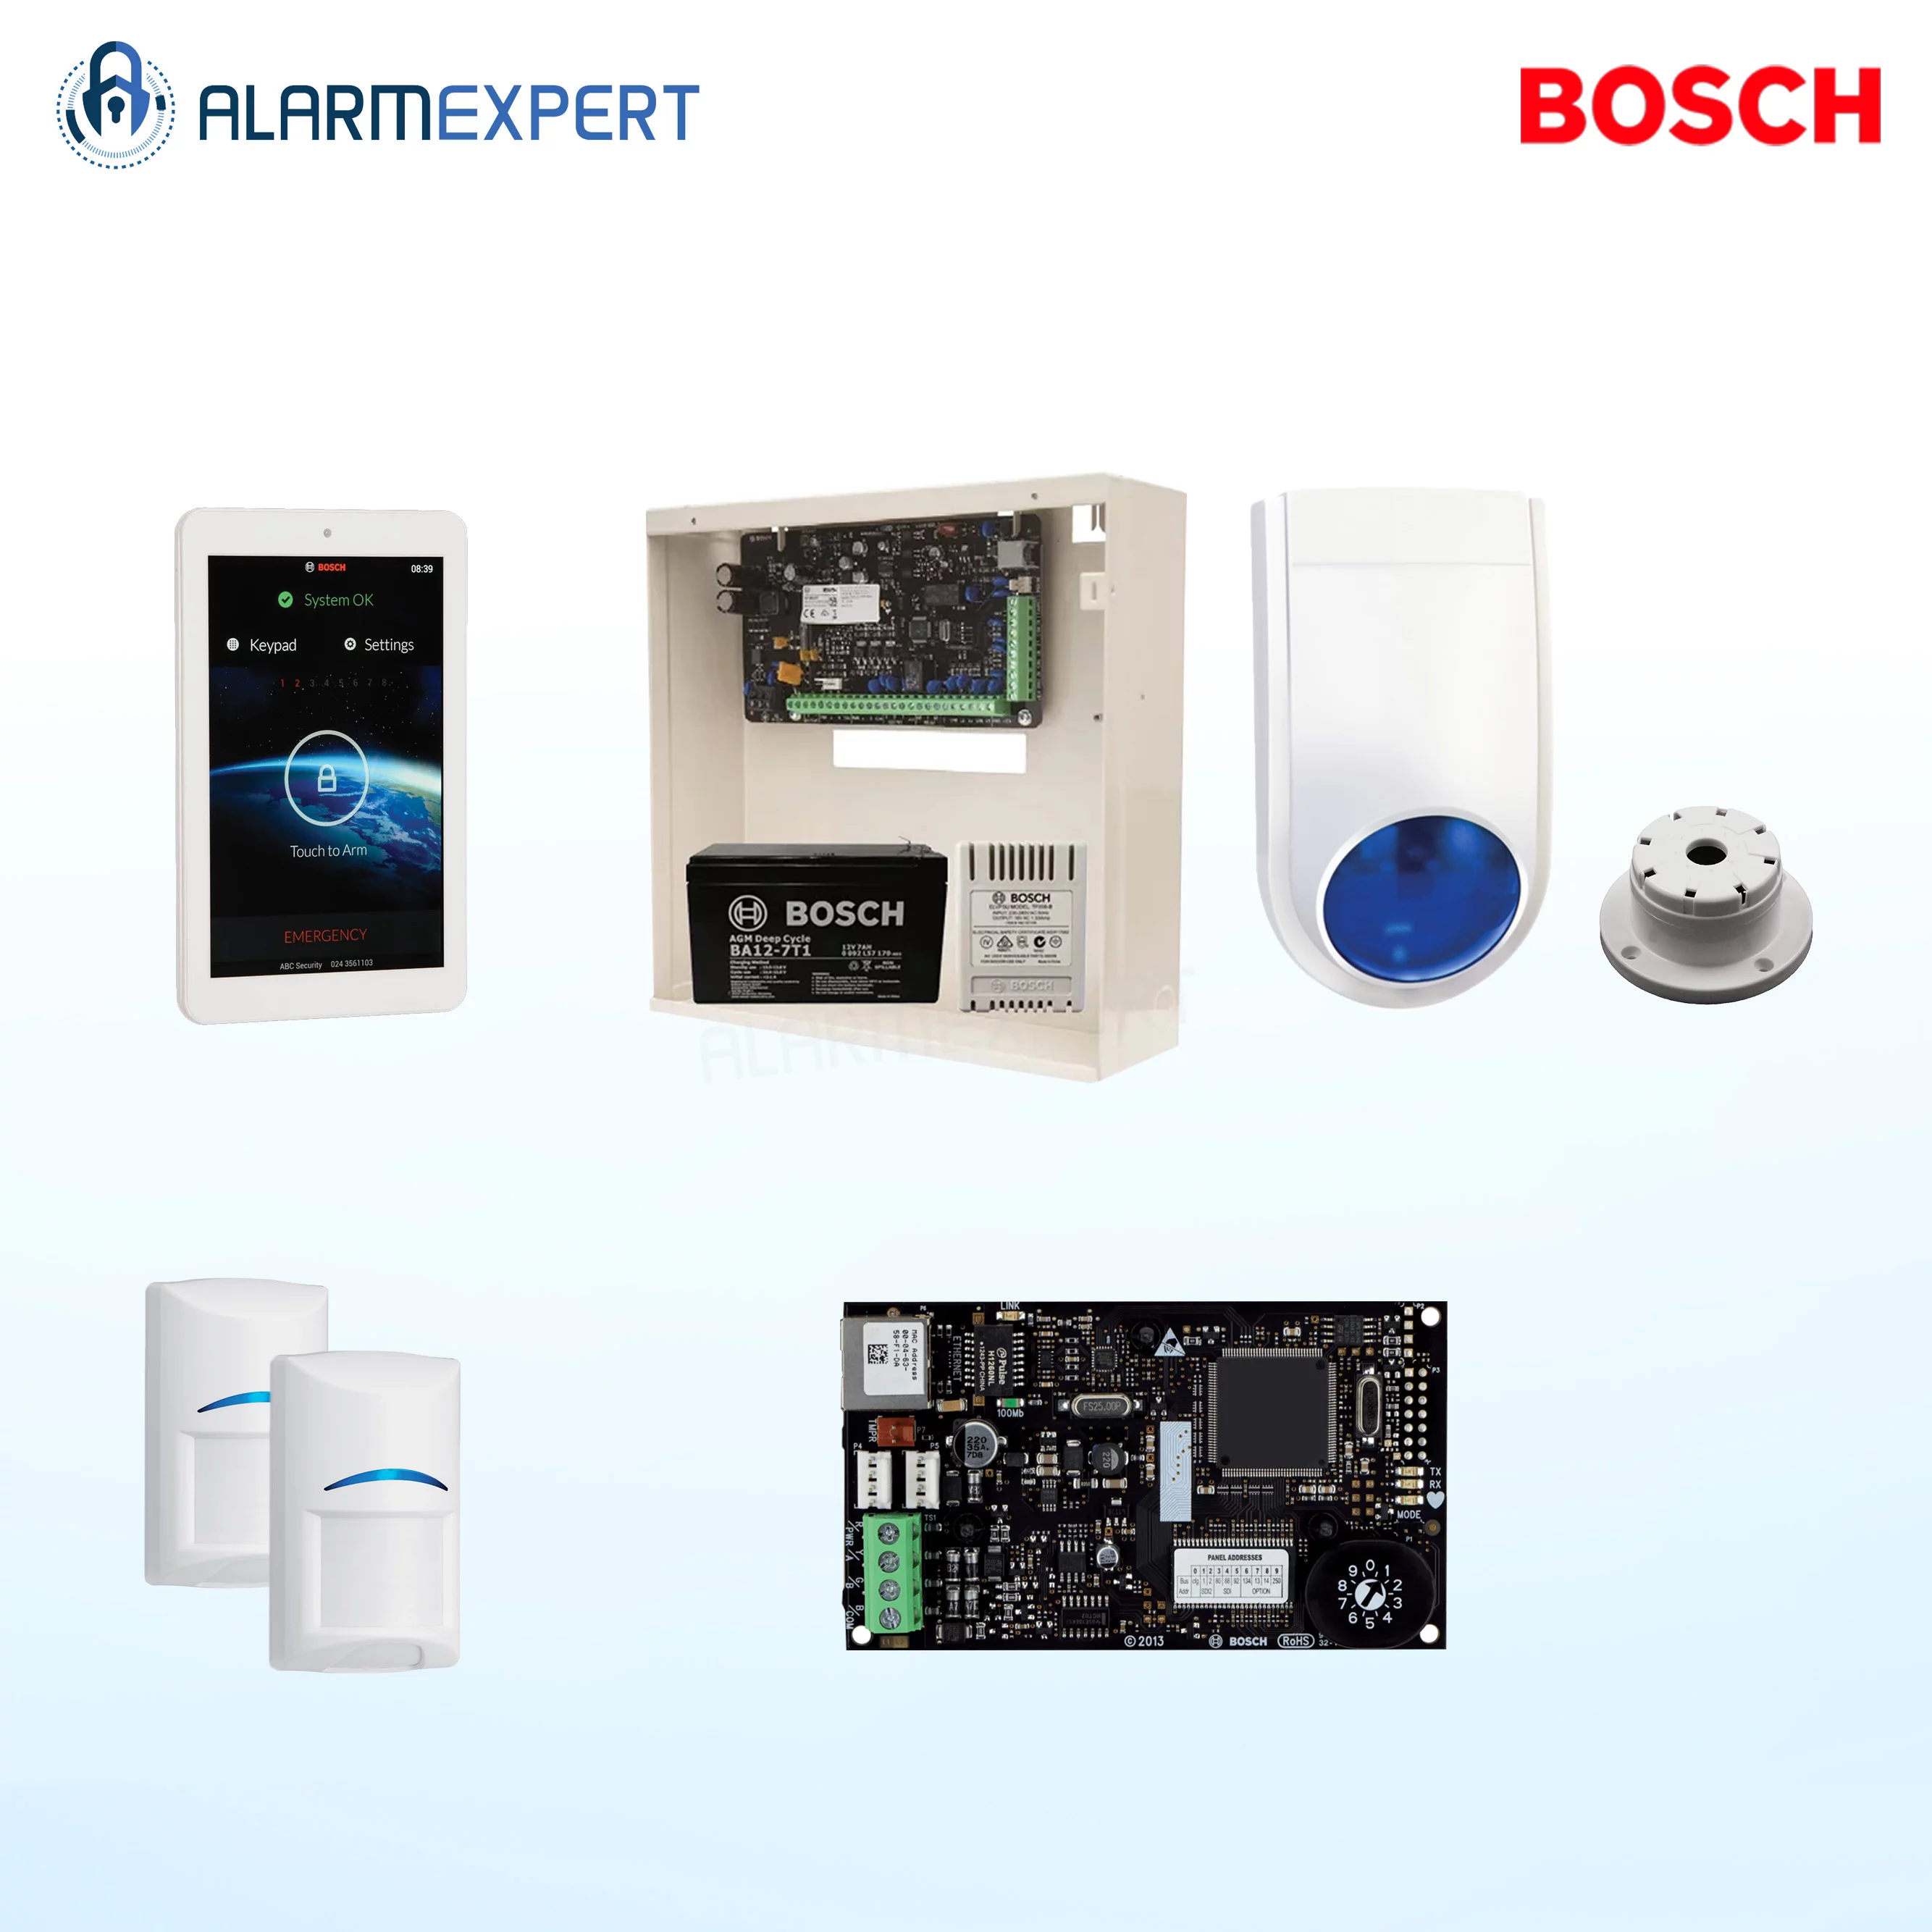 Bosch Solution 2000 IP + 2 QUADs + 7" Touch screen Keypad